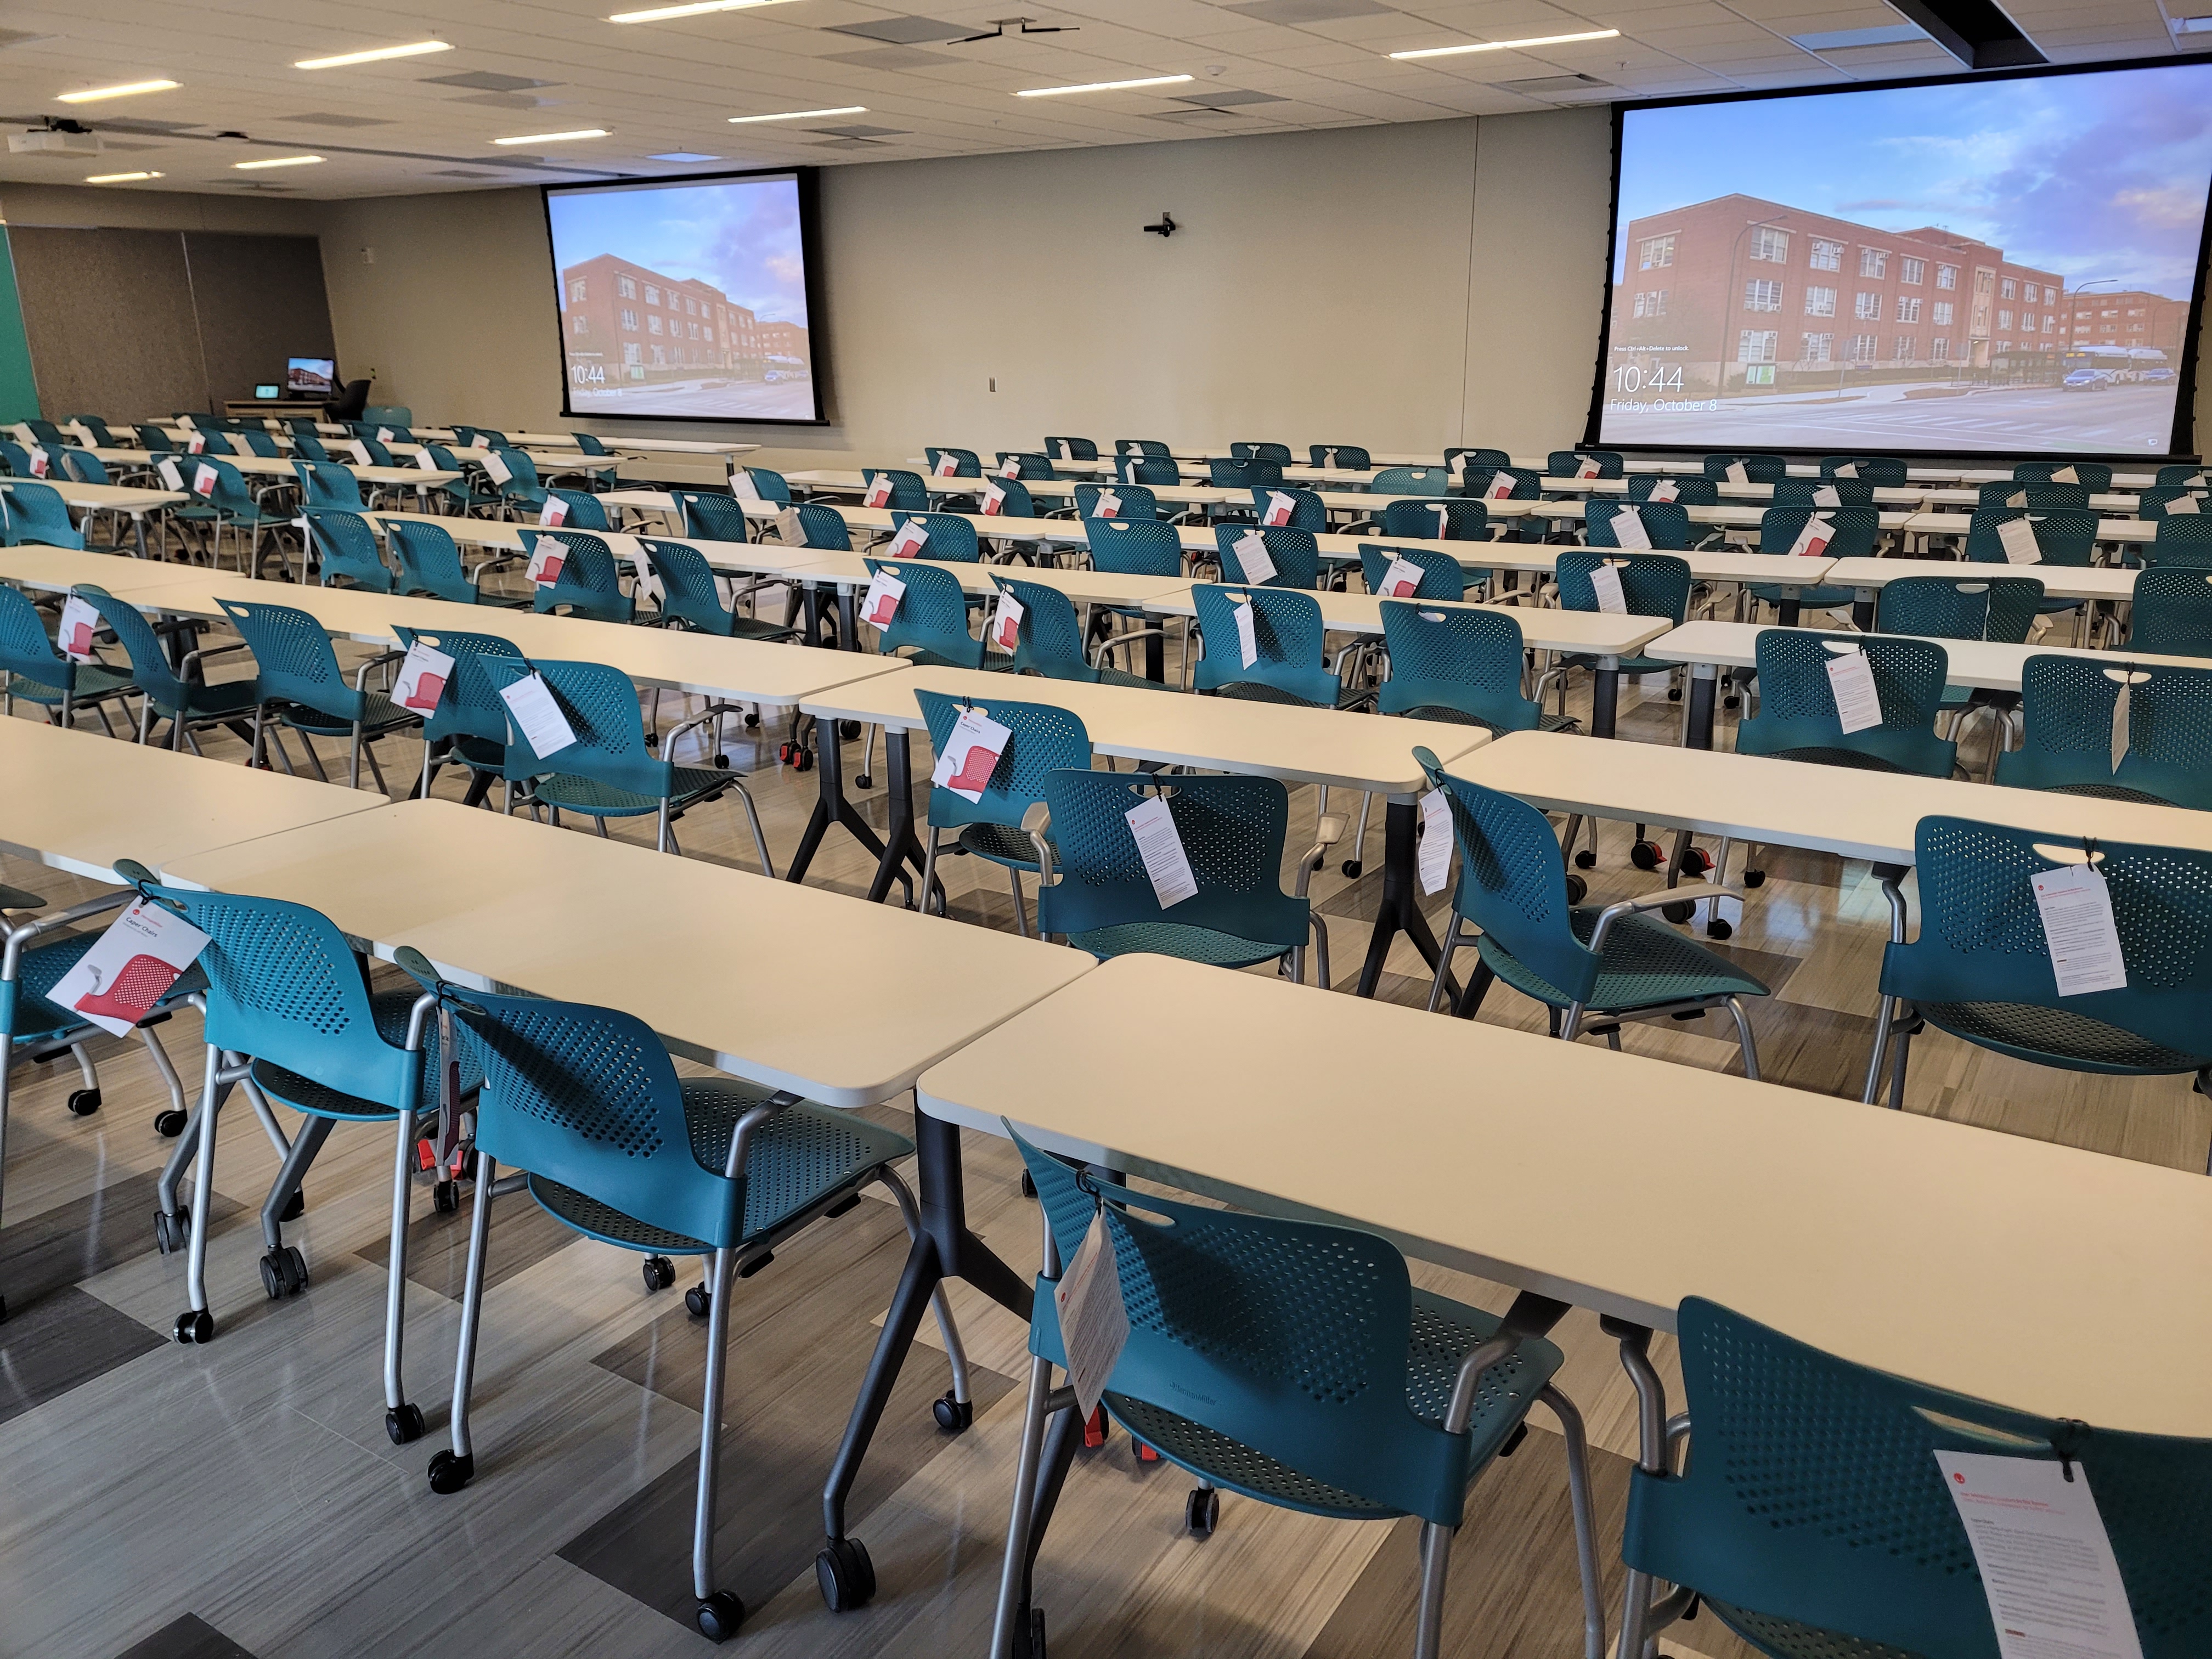 The view of the room with student tables and chairs in a row, a front lectern, and two projector screens.